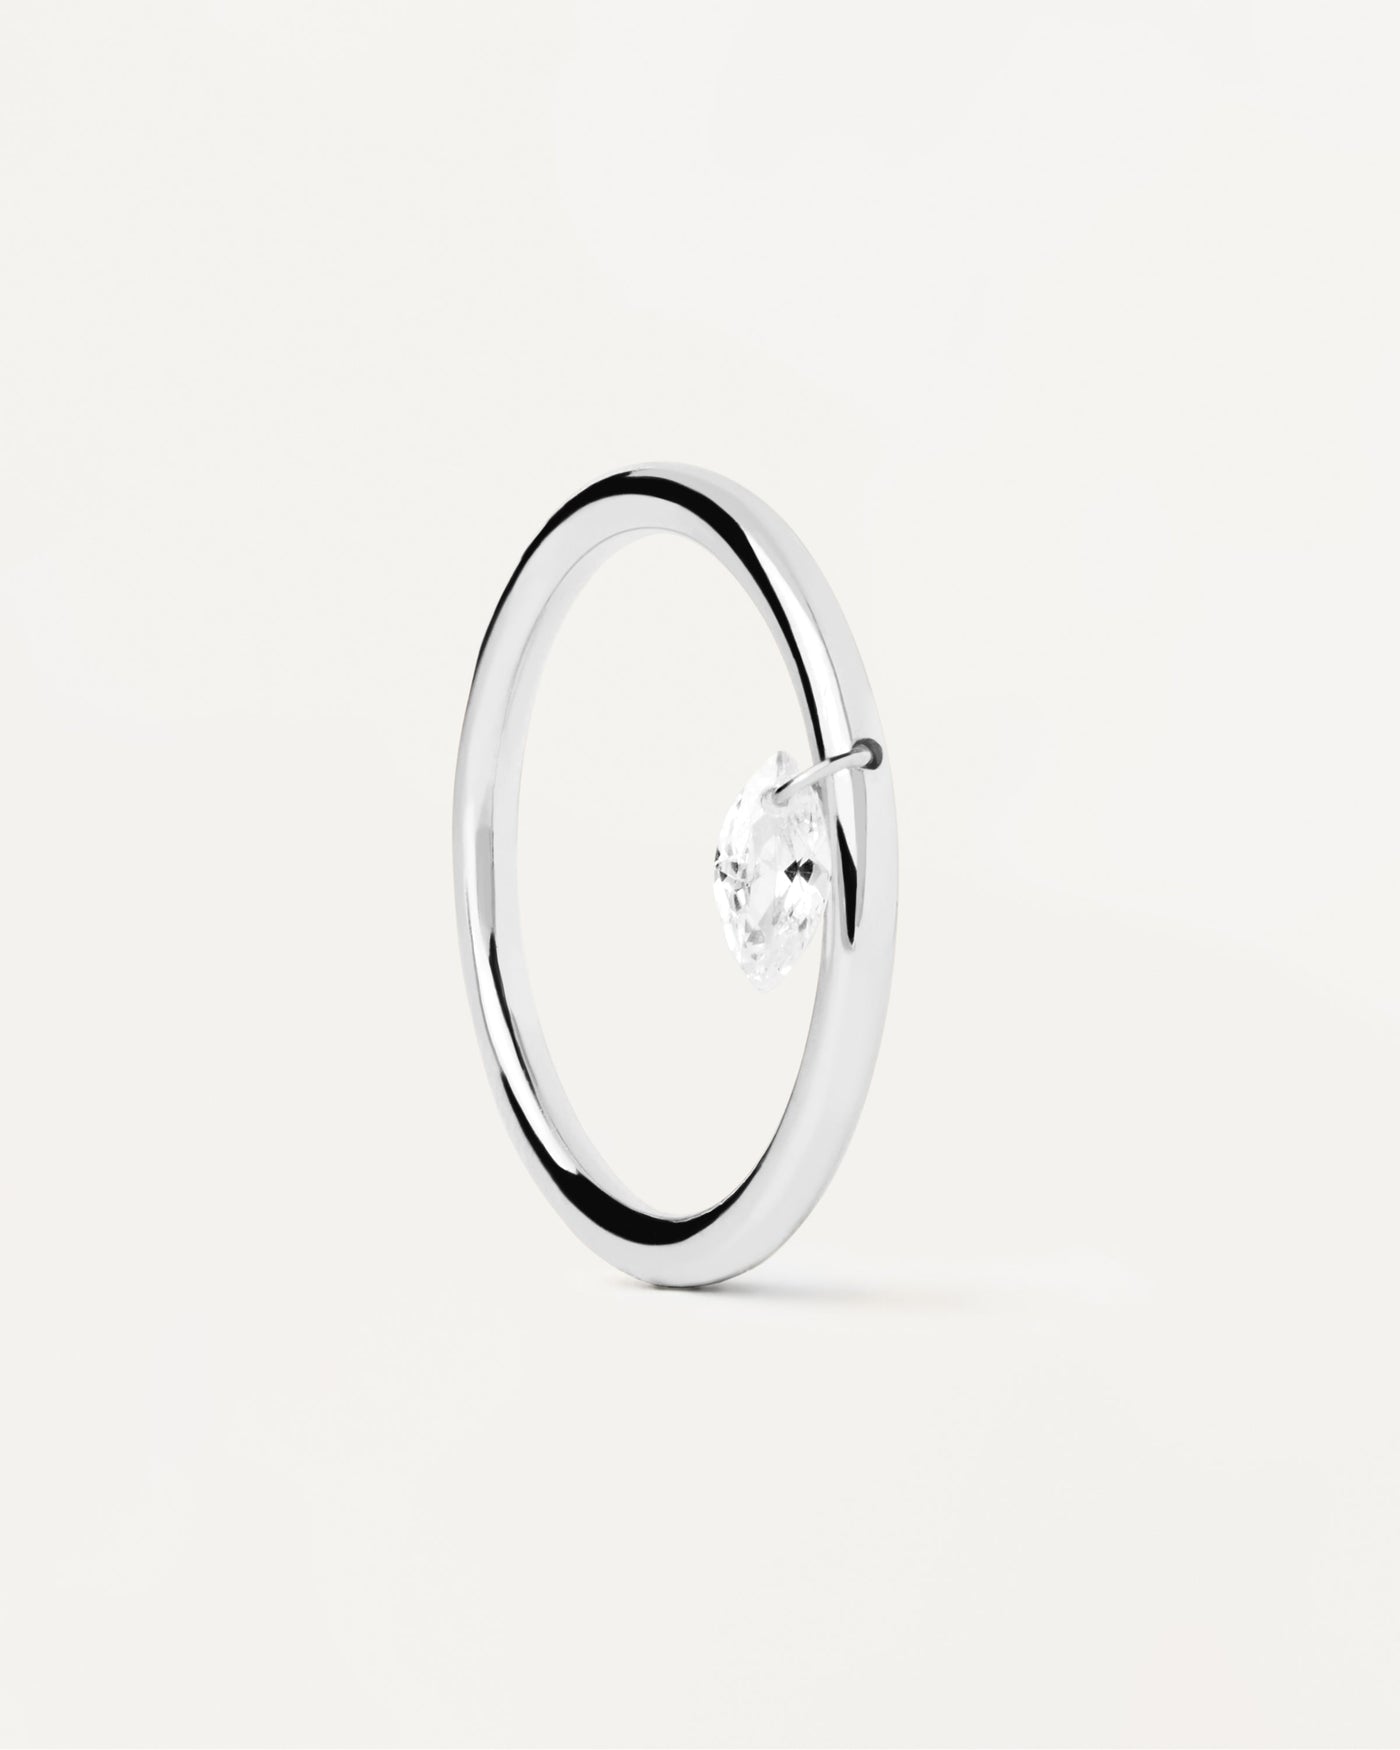 2023 Selection | Rain Solitary Silver Ring. Sterling silver ring with small white zirconia drop pendant. Get the latest arrival from PDPAOLA. Place your order safely and get this Best Seller. Free Shipping.